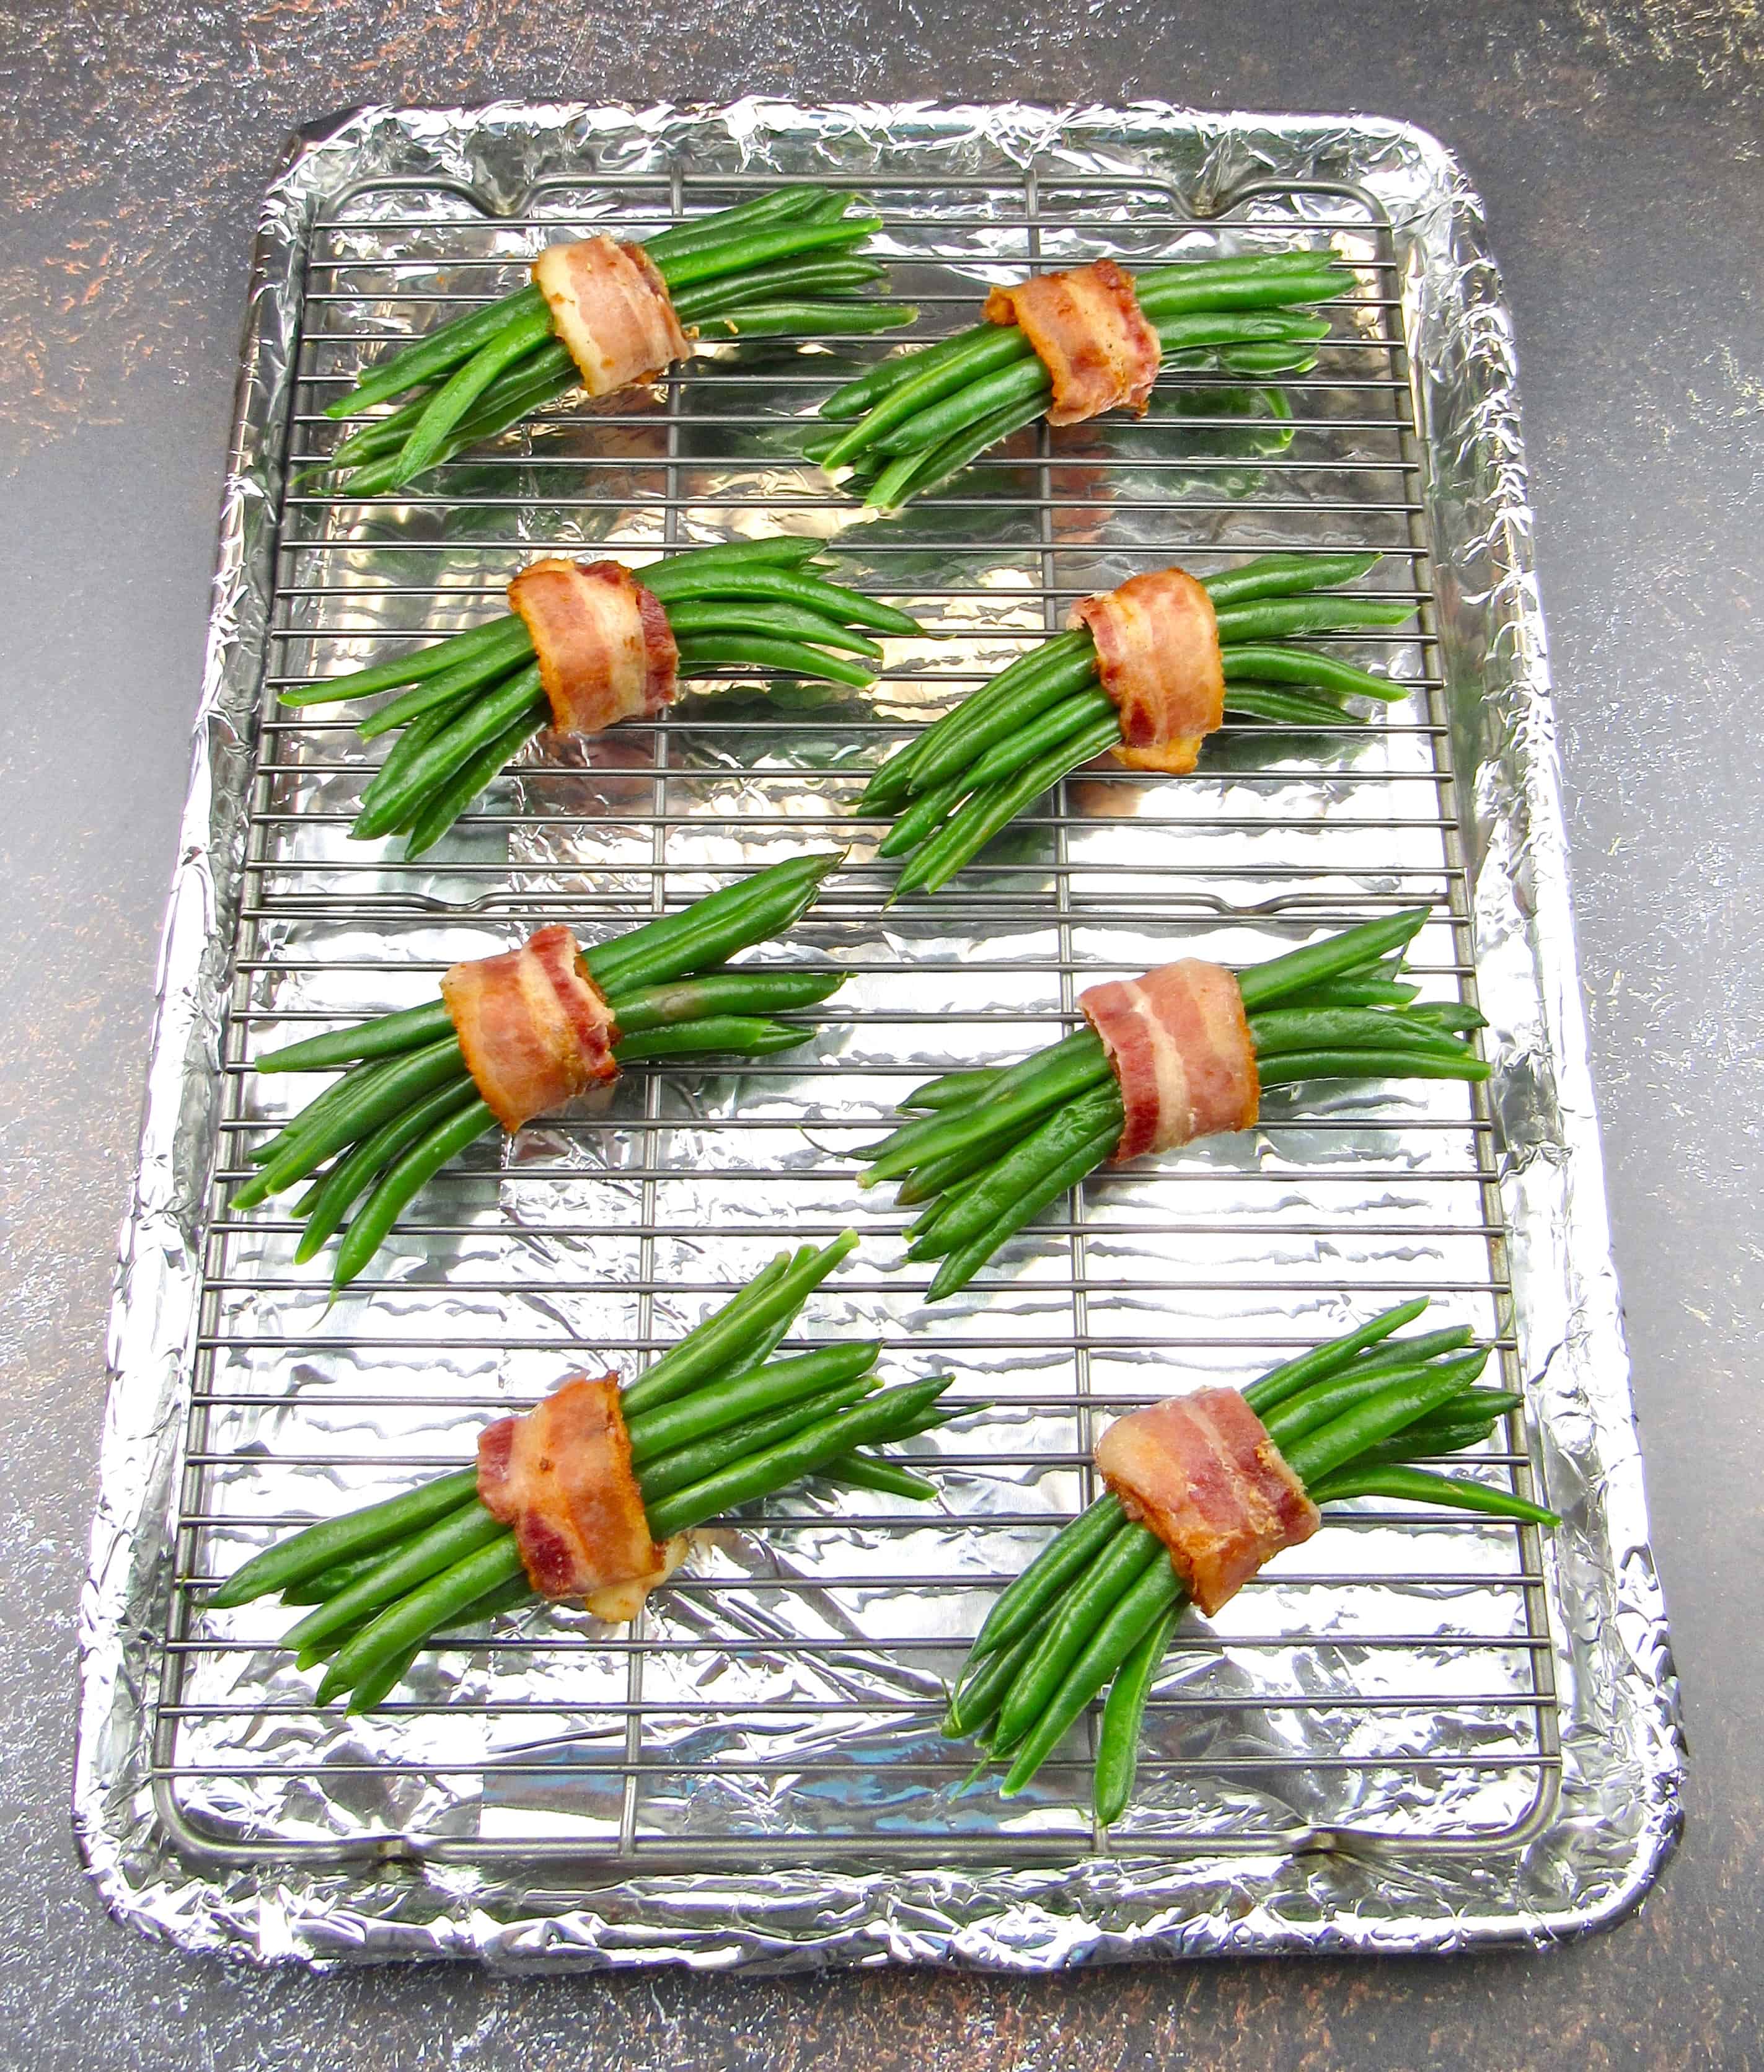 8 bundles of green beans wrapped in bacon